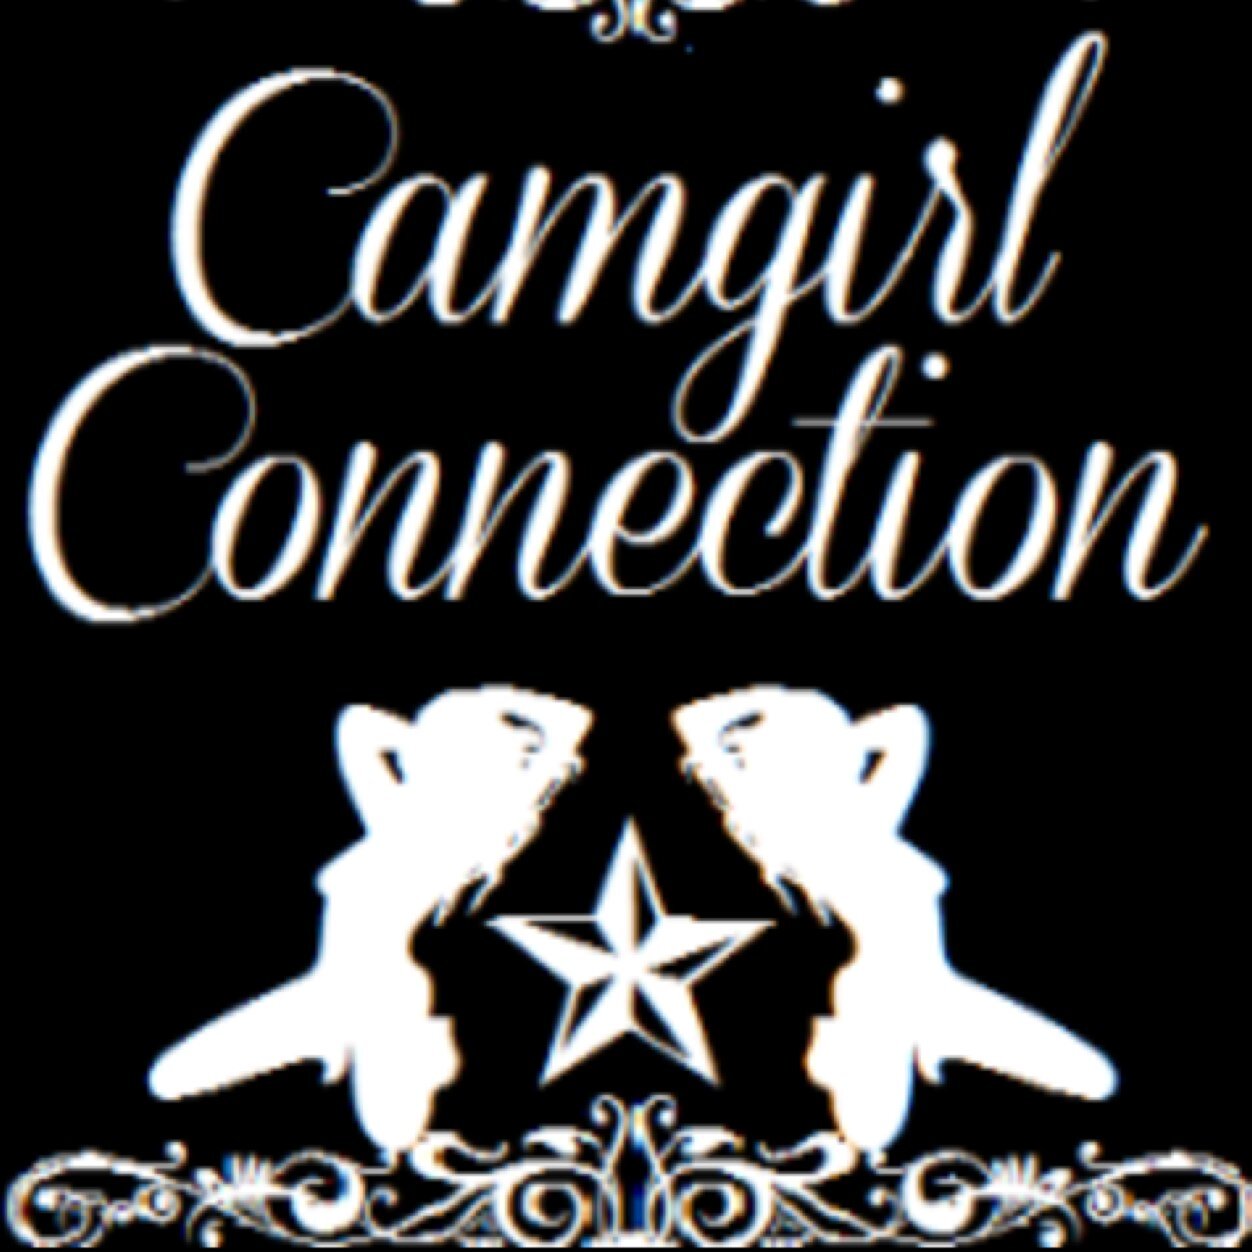 Camgirl Connection Connect2cam Twitter